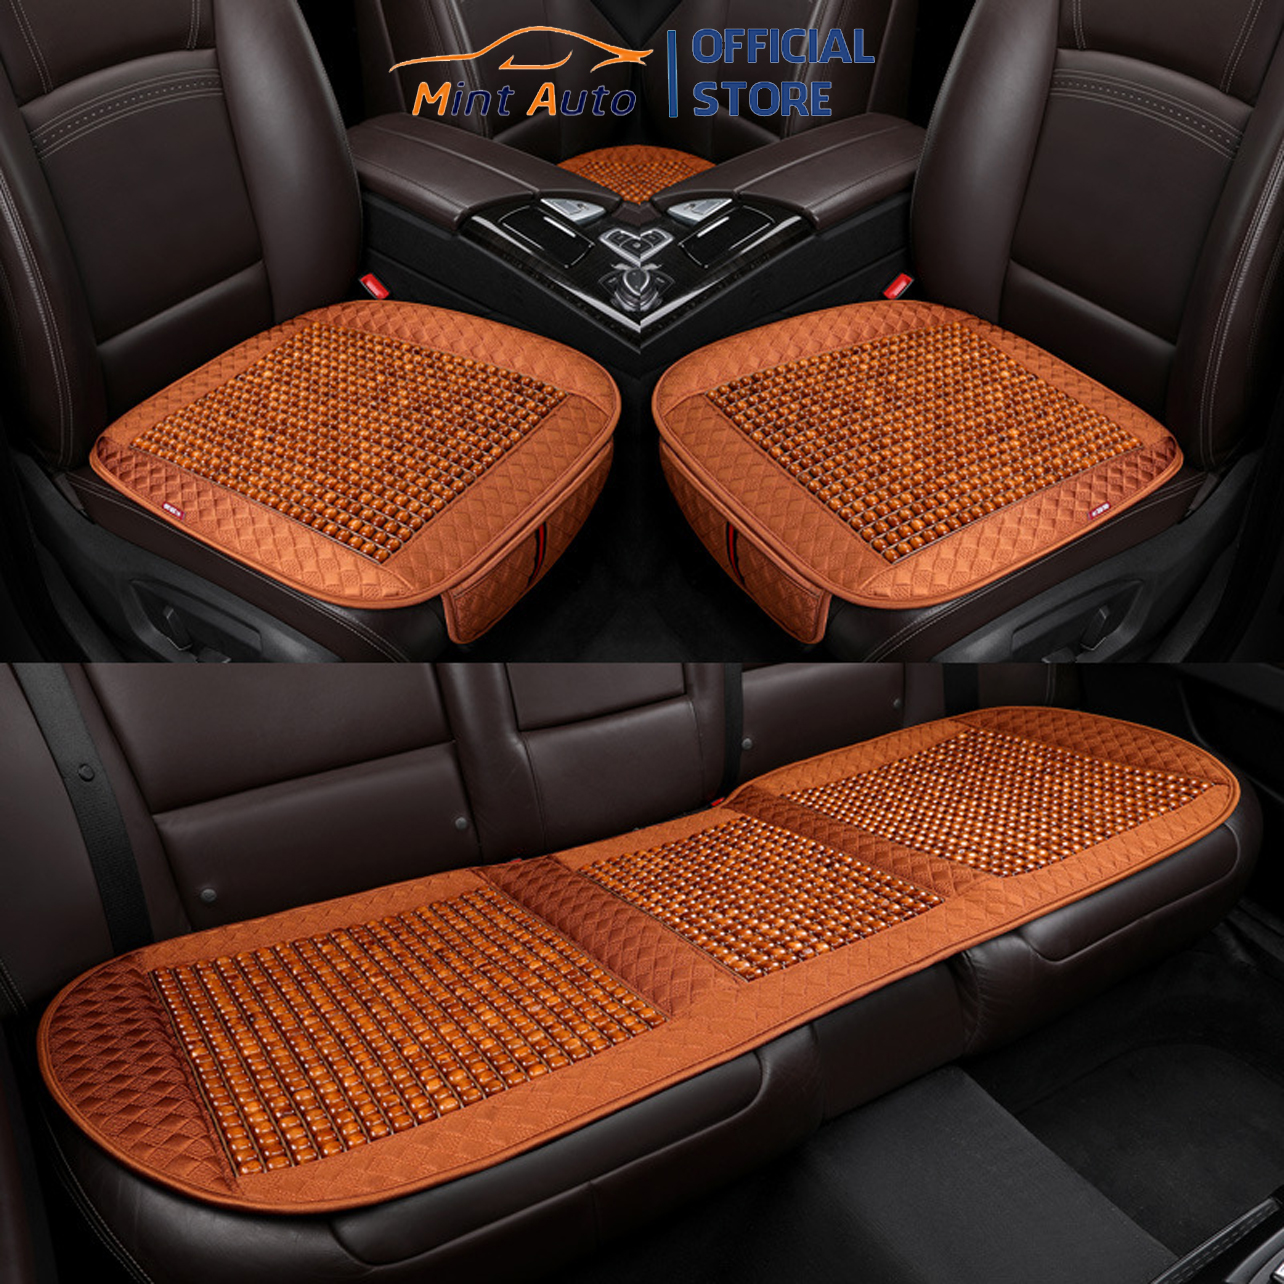 Deluxe massage wood grain car seat covers cushion set